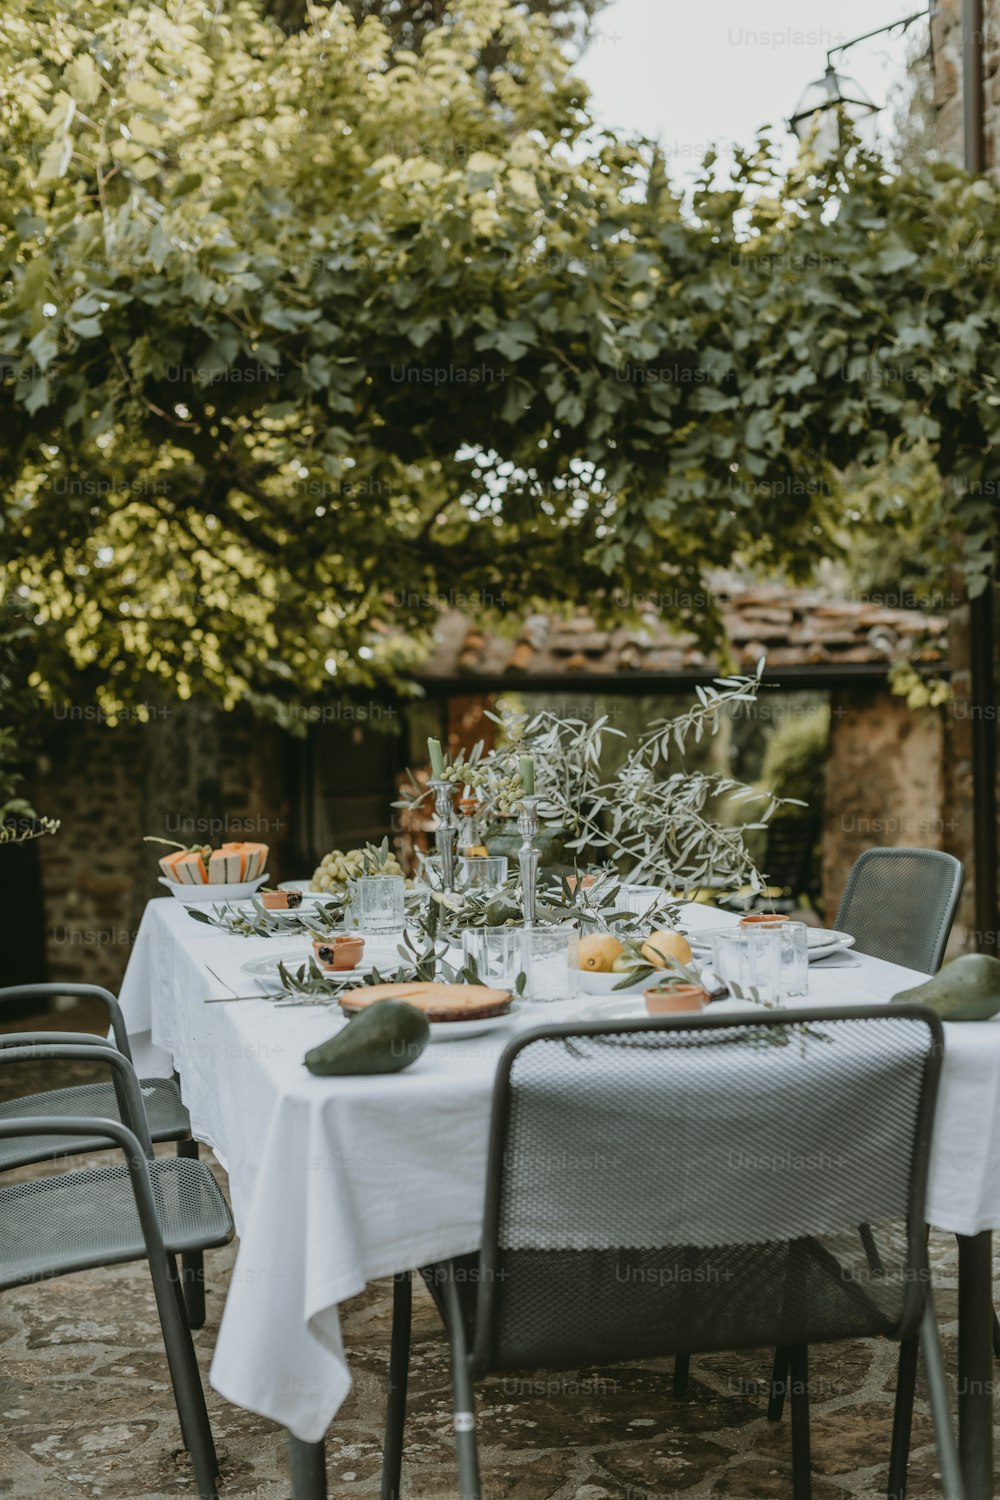 a table with a white table cloth is set outside